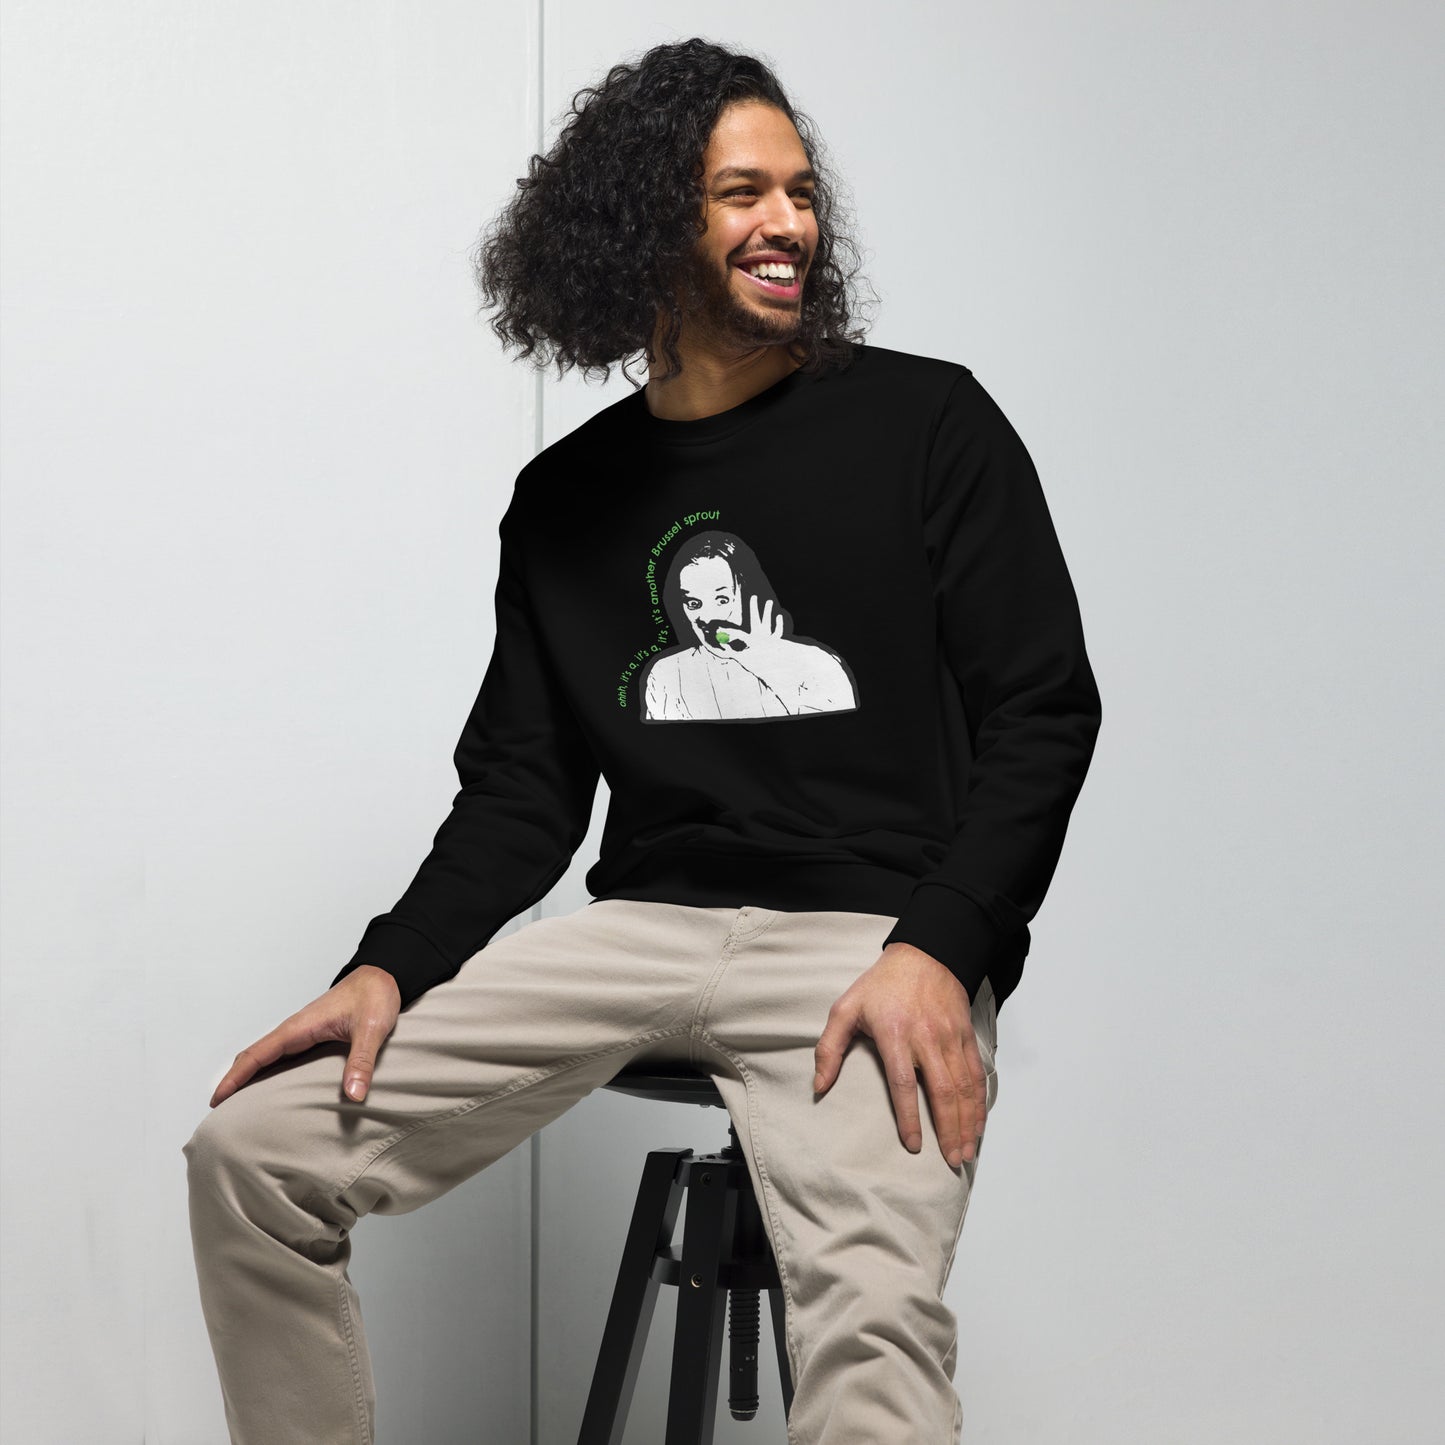 Another brussel sprout - Unisex organic sweatshirt